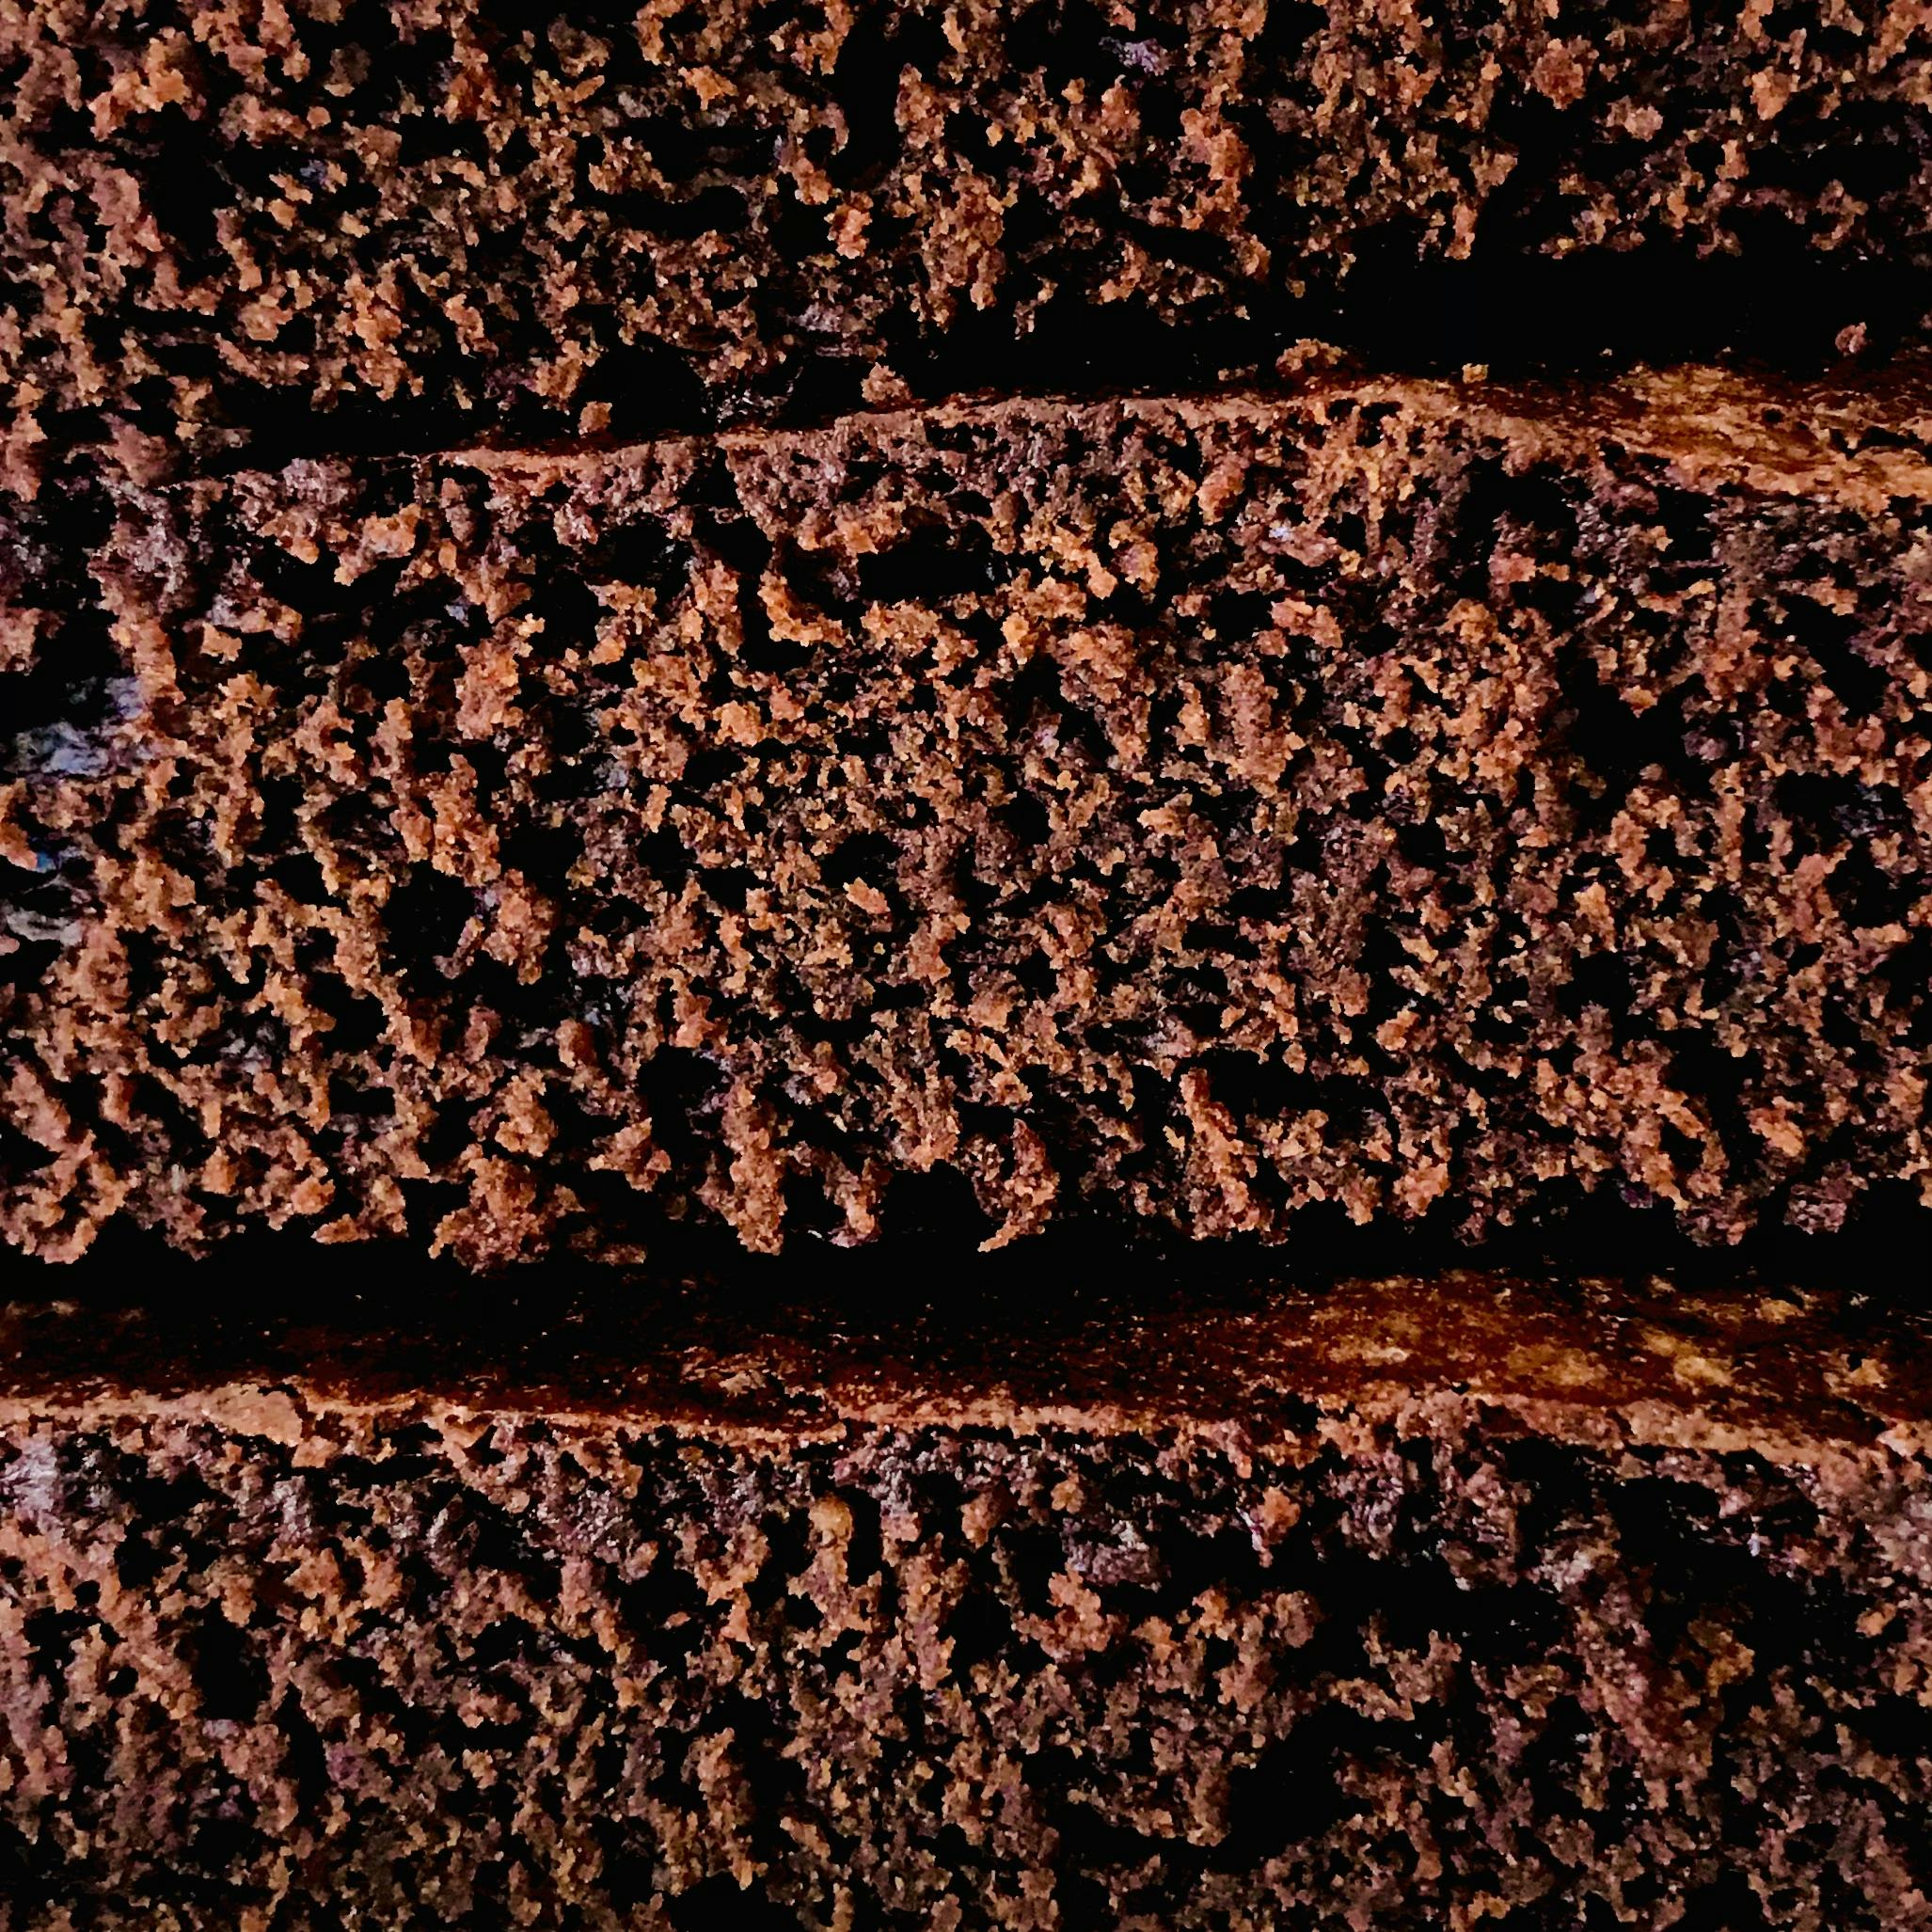 VEGAN Brownies! Delivery+shipping 